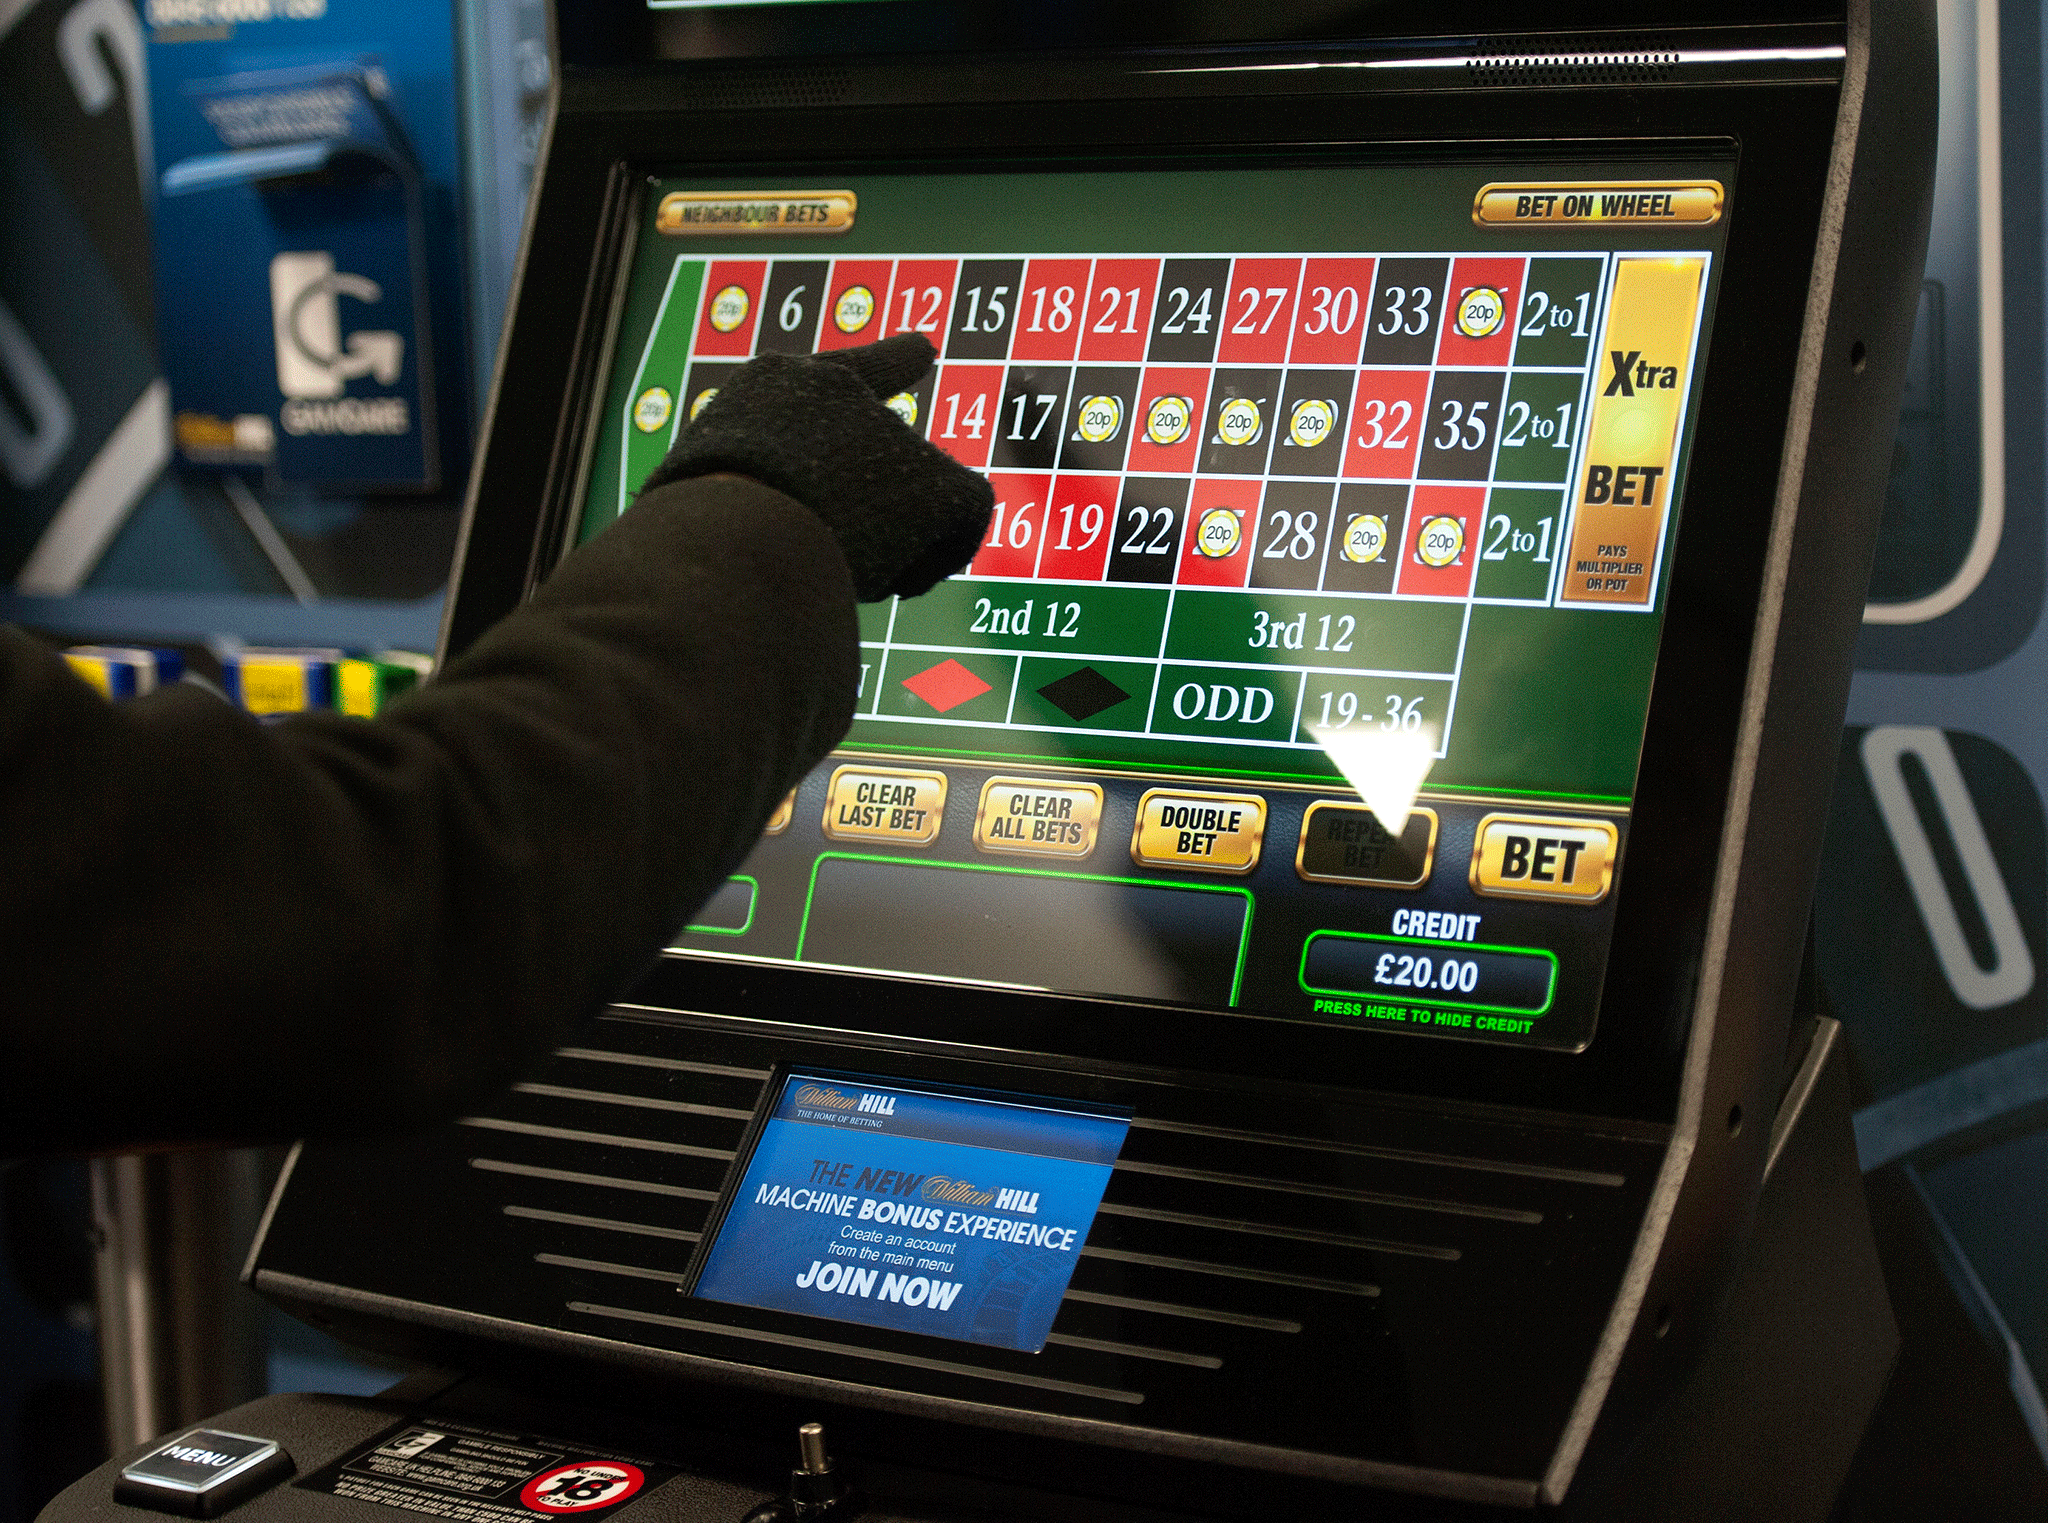 UK Wants to Raise Online Gambling Tax in 2019, Allowing for Delay in FOBT Cuts